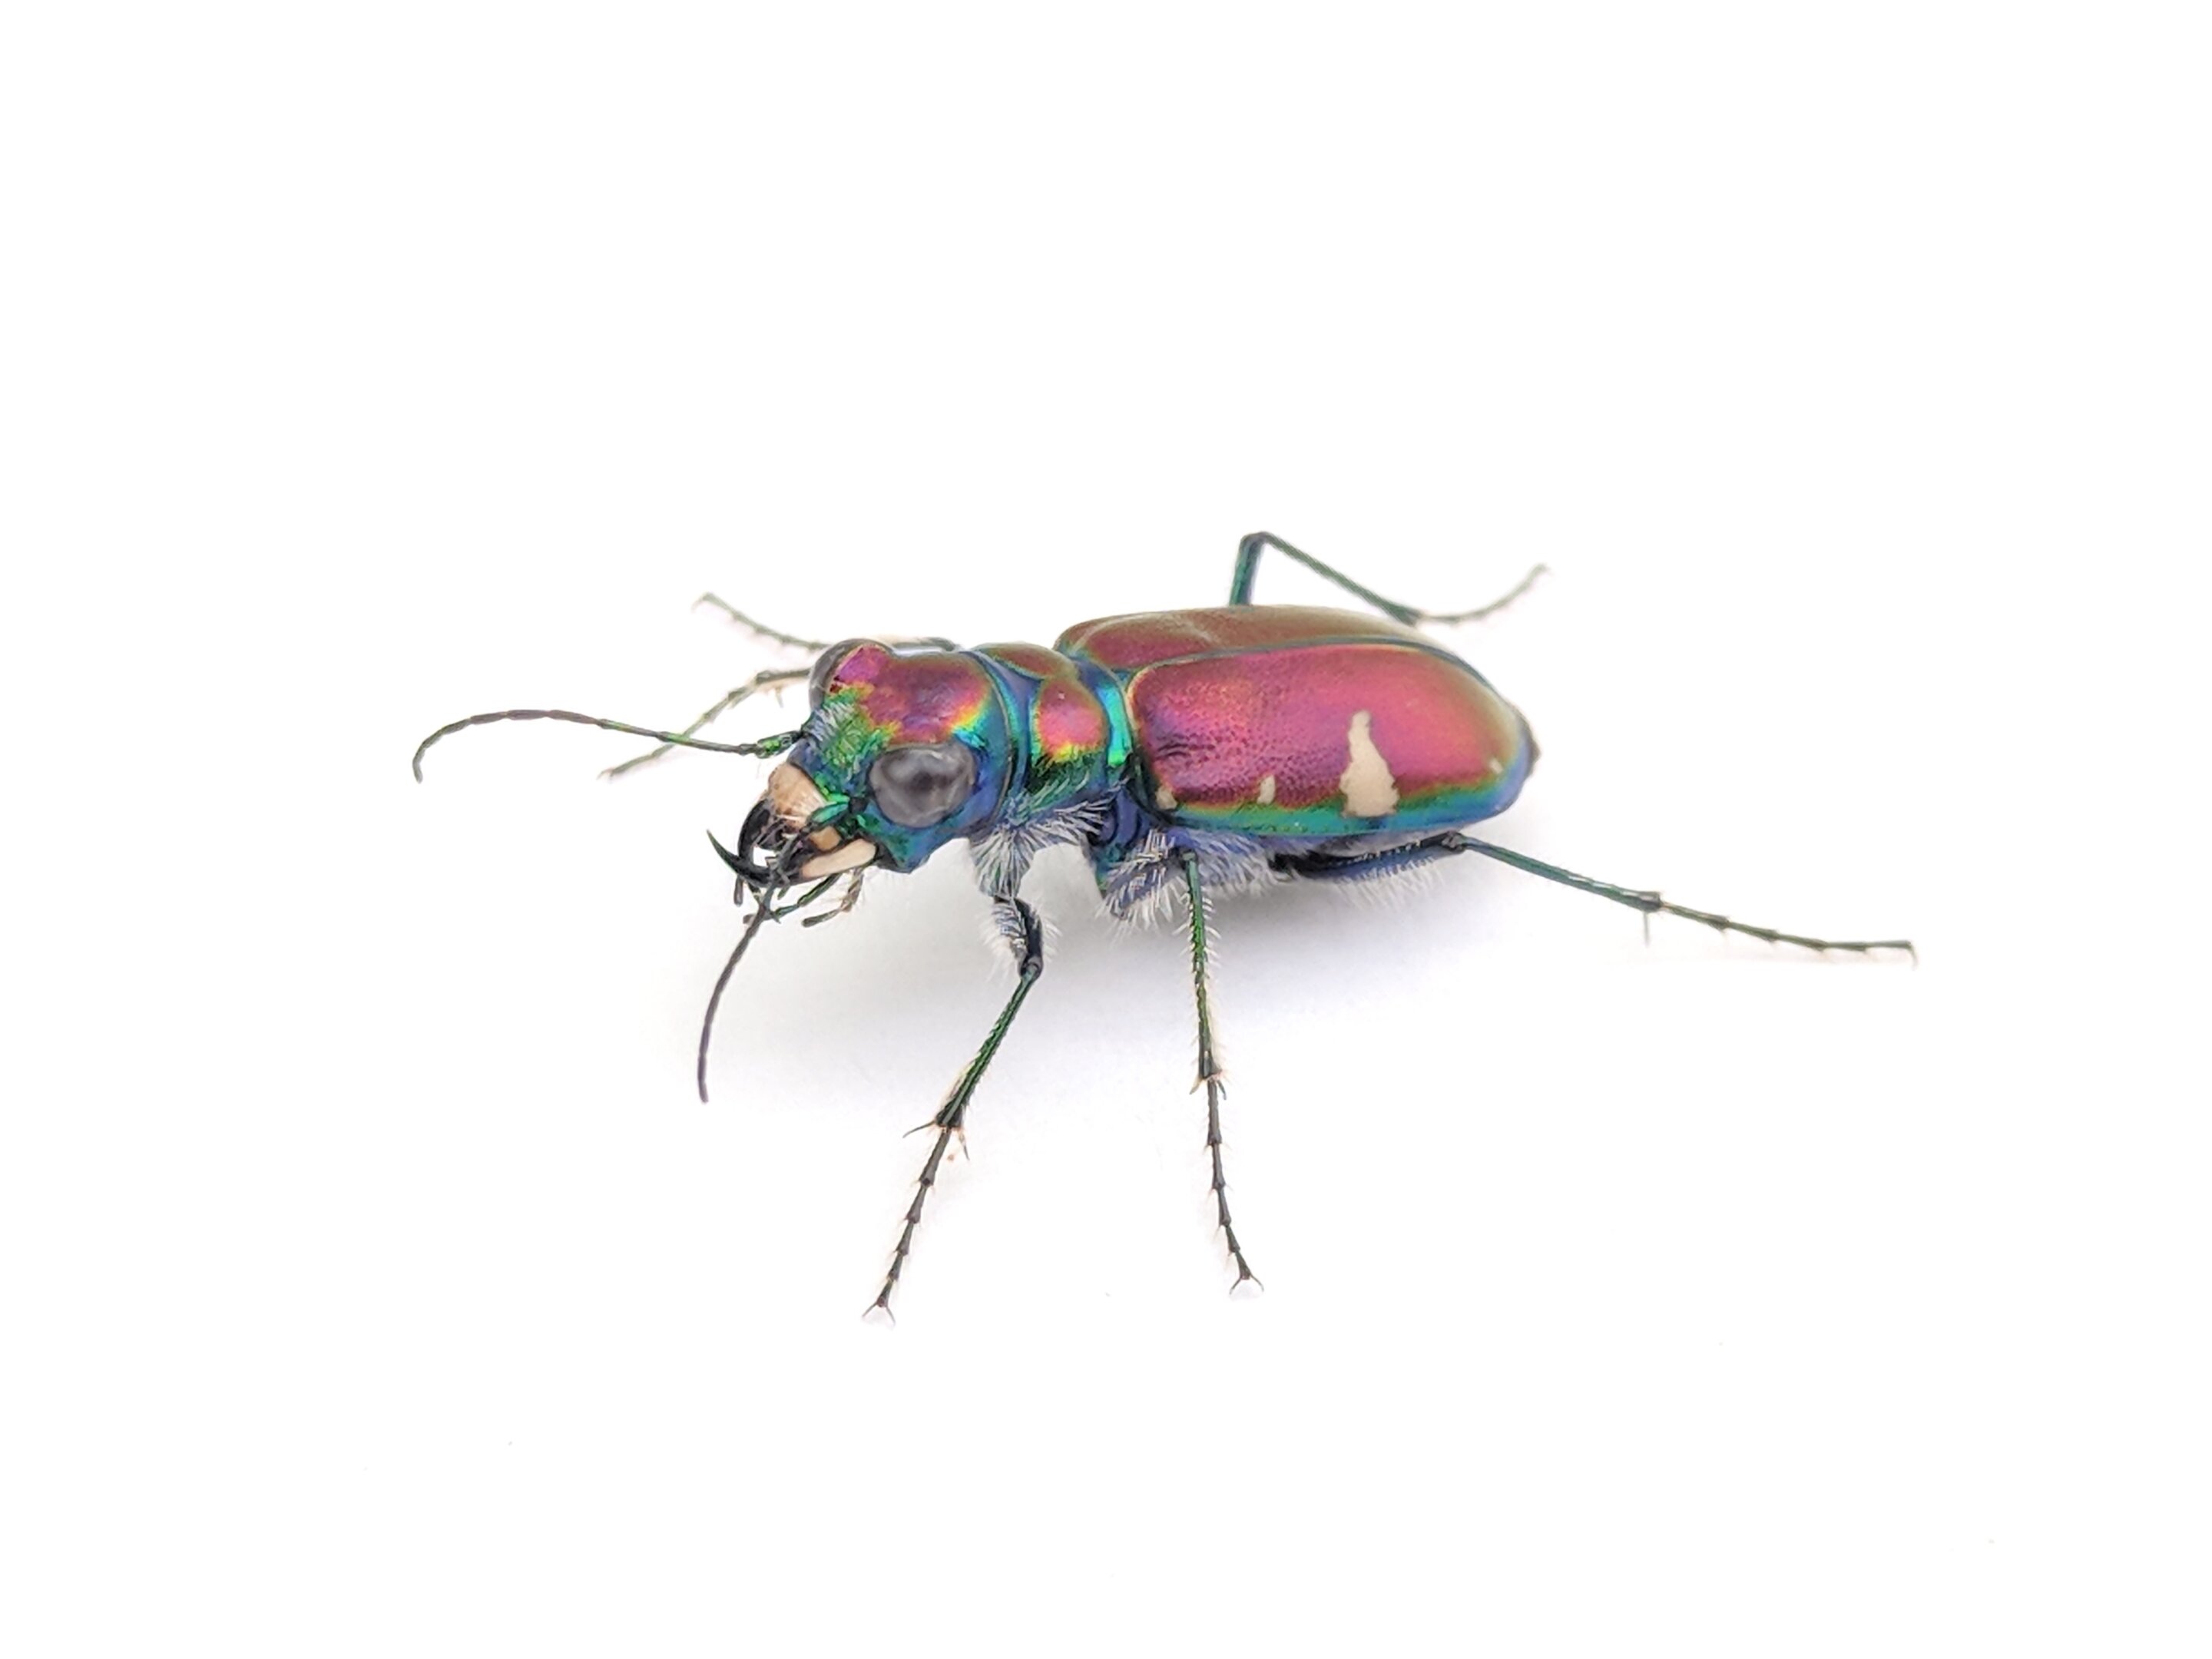 #Tiger beetles fight off bat attacks with ultrasonic mimicry